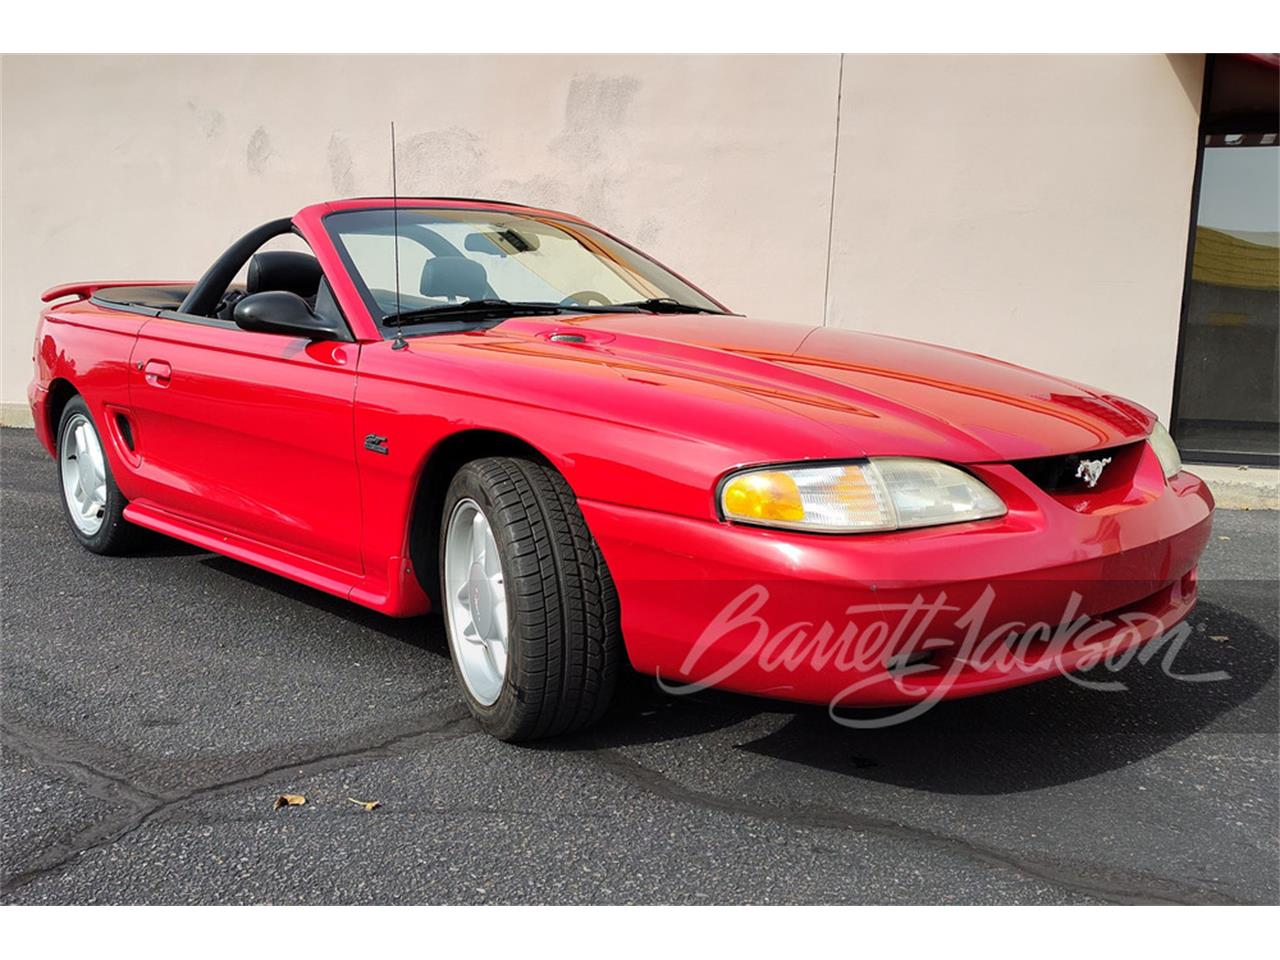 For Sale at Auction: 1995 Ford Mustang GT in Scottsdale, Arizona for sale in Scottsdale, AZ